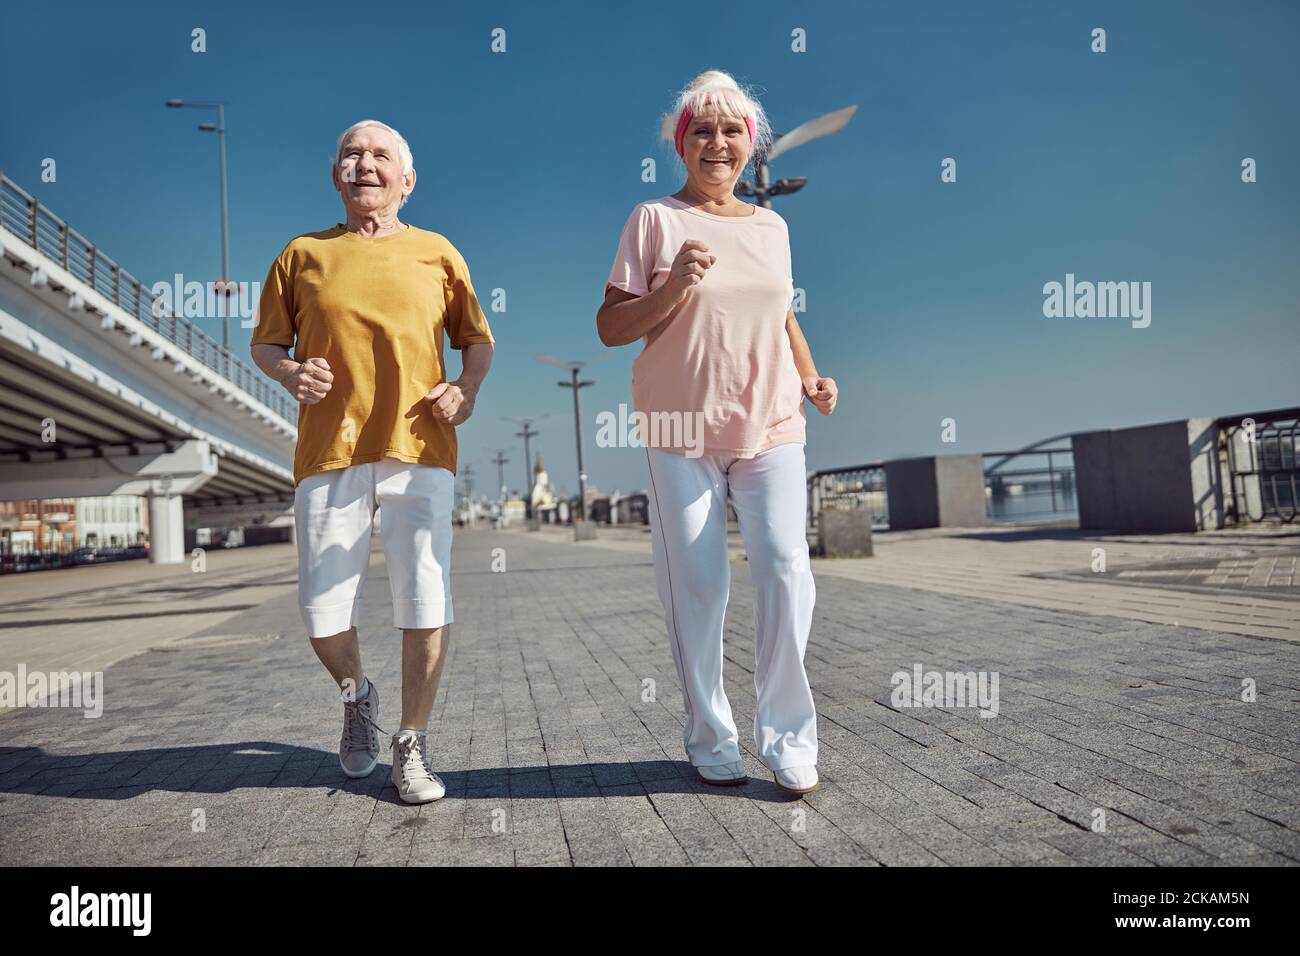 Elderly woman and a man working out together Stock Photo